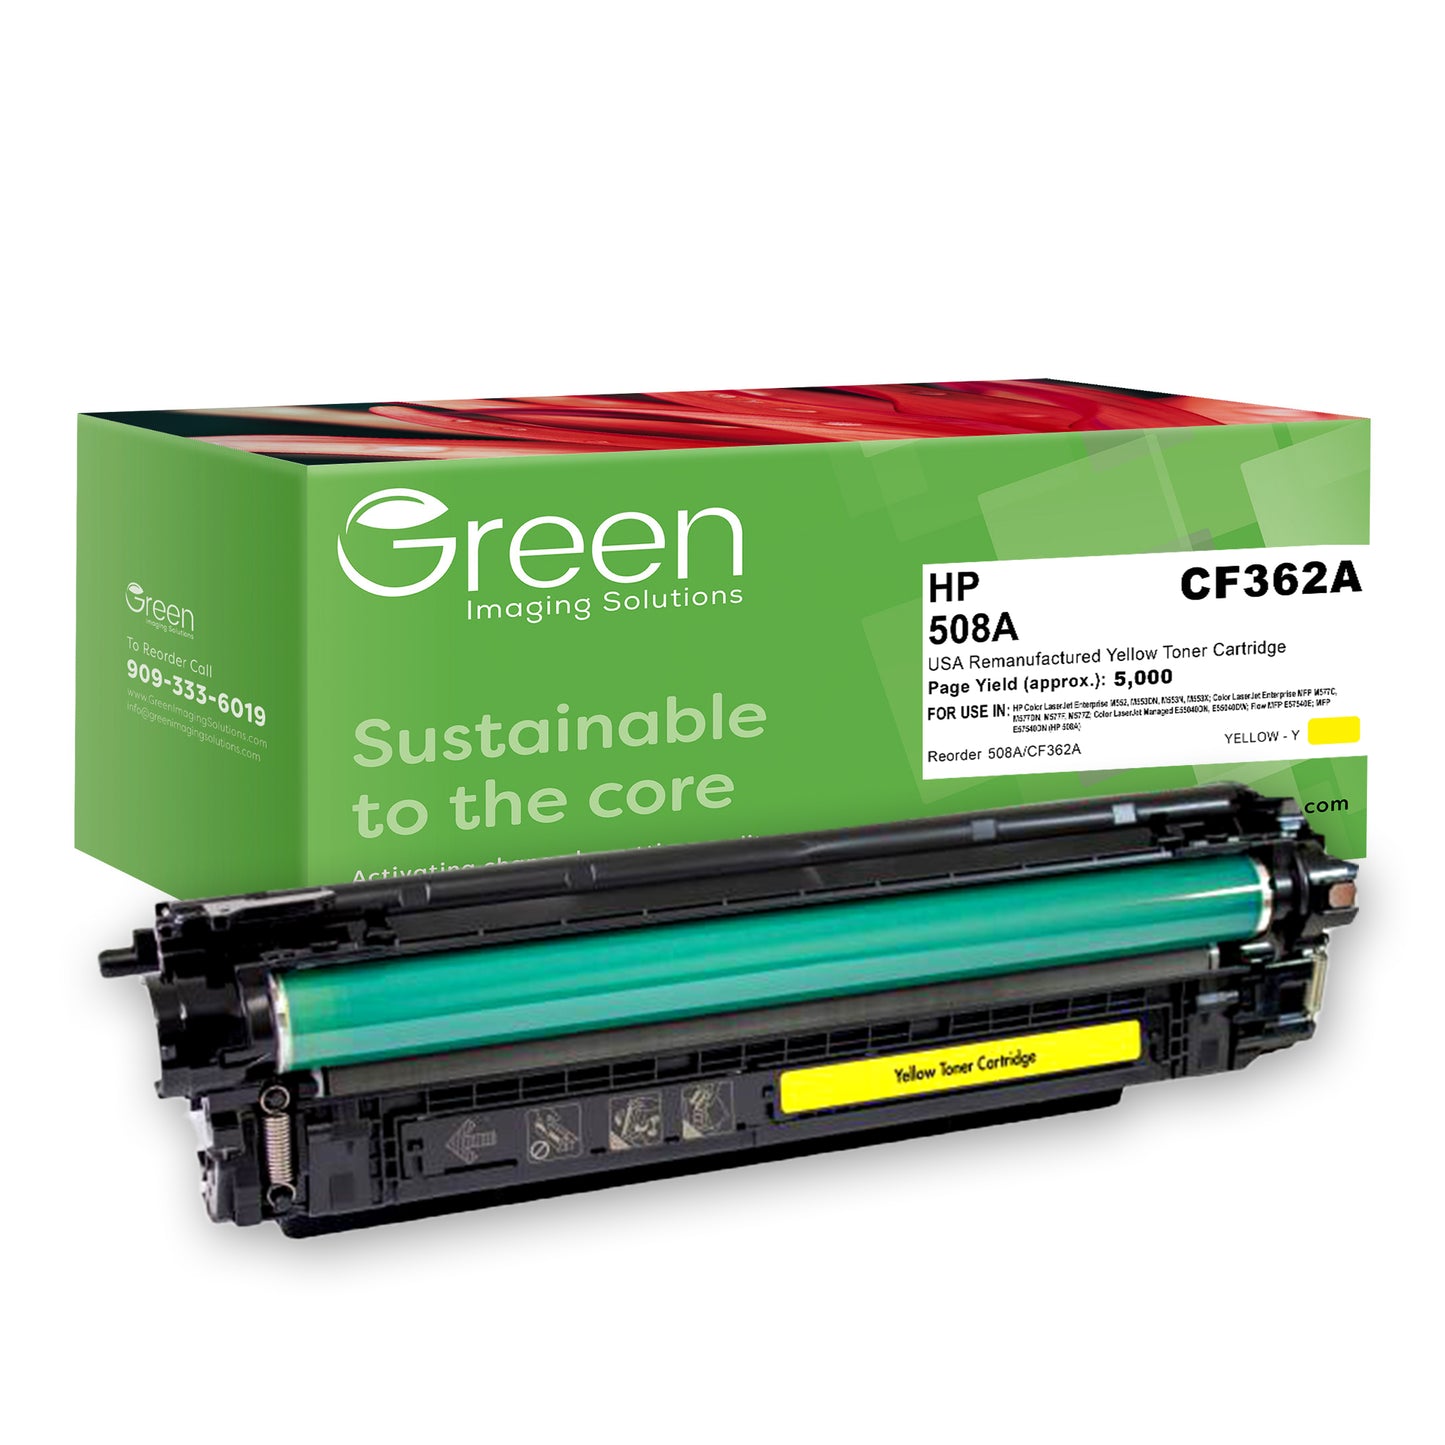 GIS USA Remanufactured Yellow Toner Cartridge for HP CF362A (HP 508A)